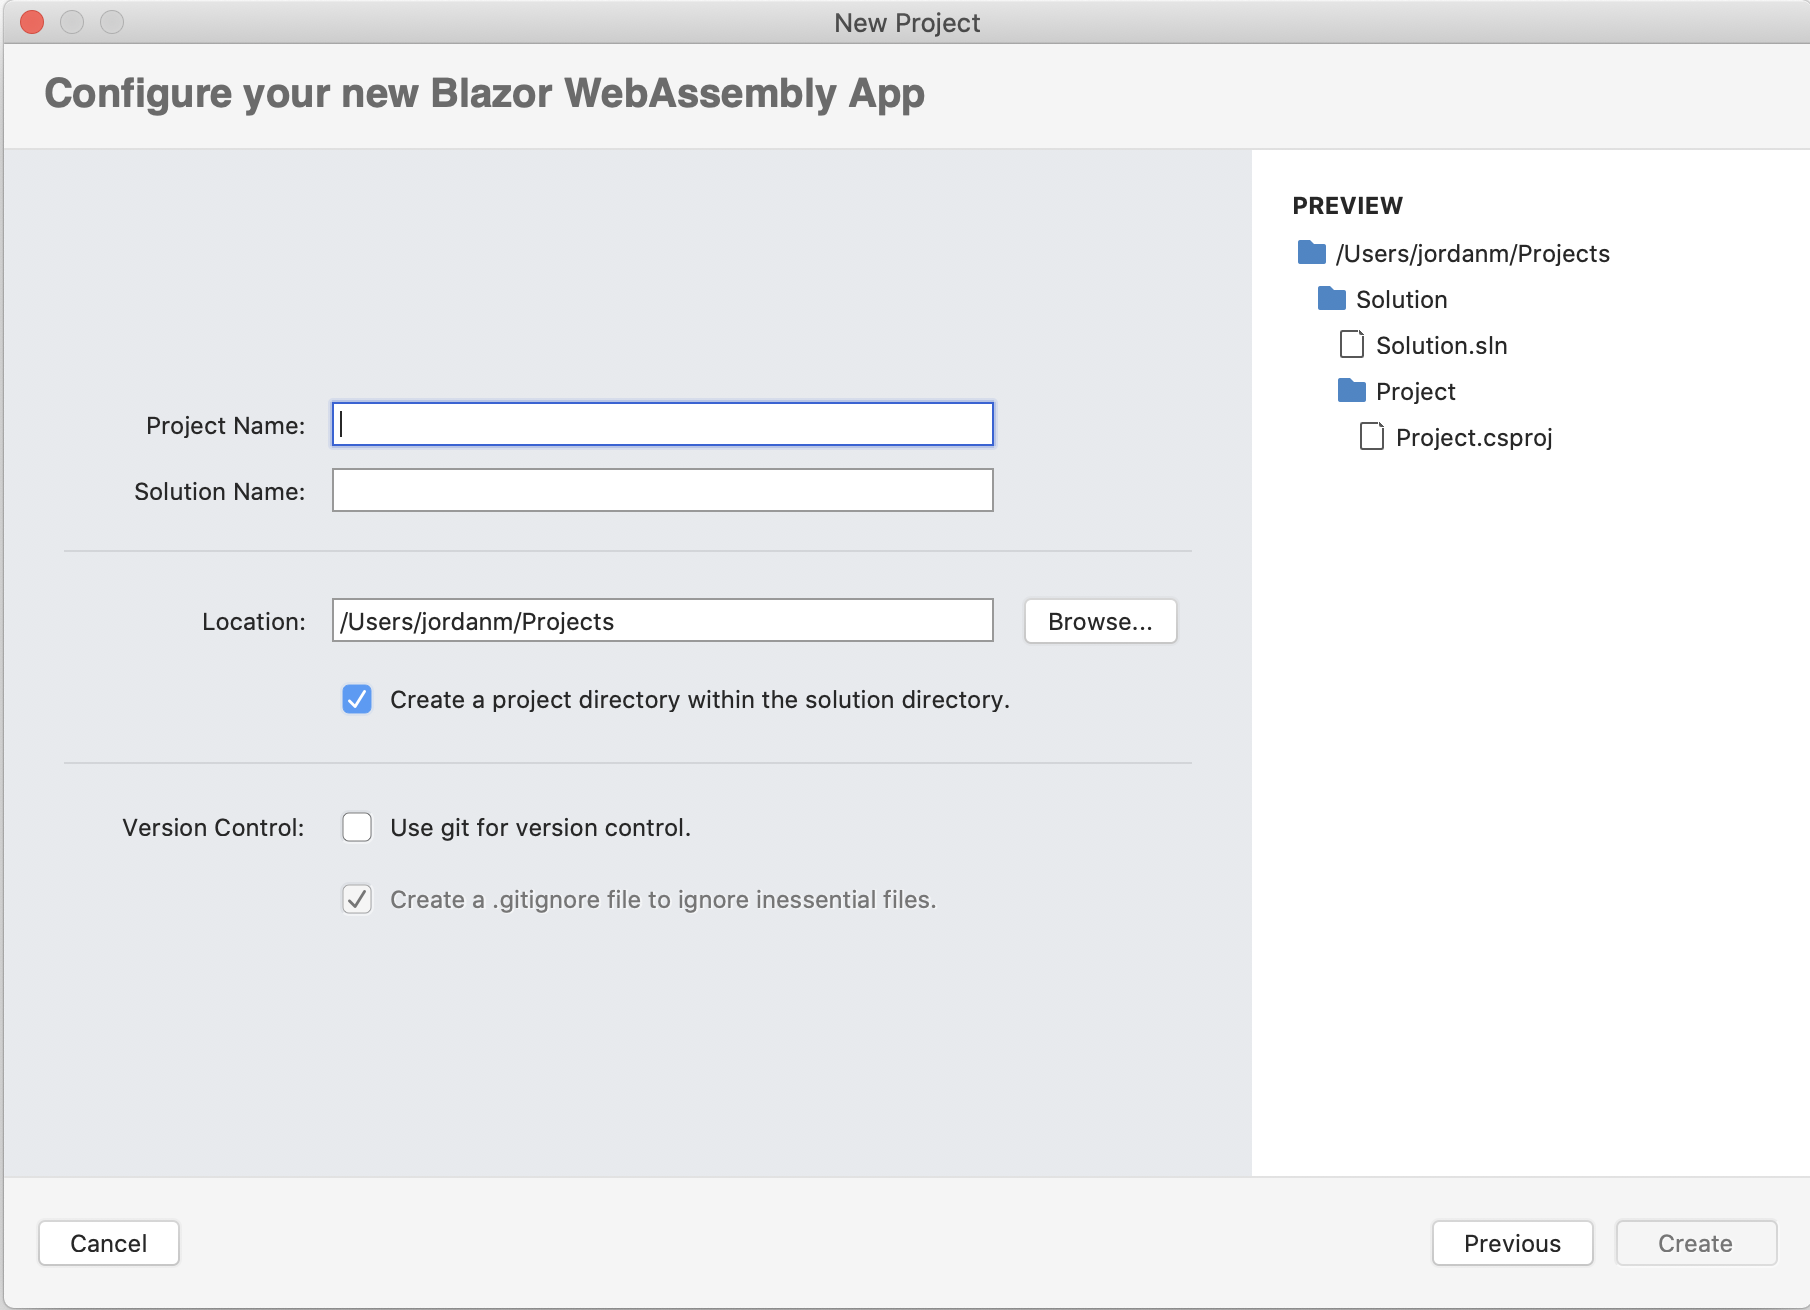 Configure your new Blazor WebAssembly App dialog displayed while entering Project Name